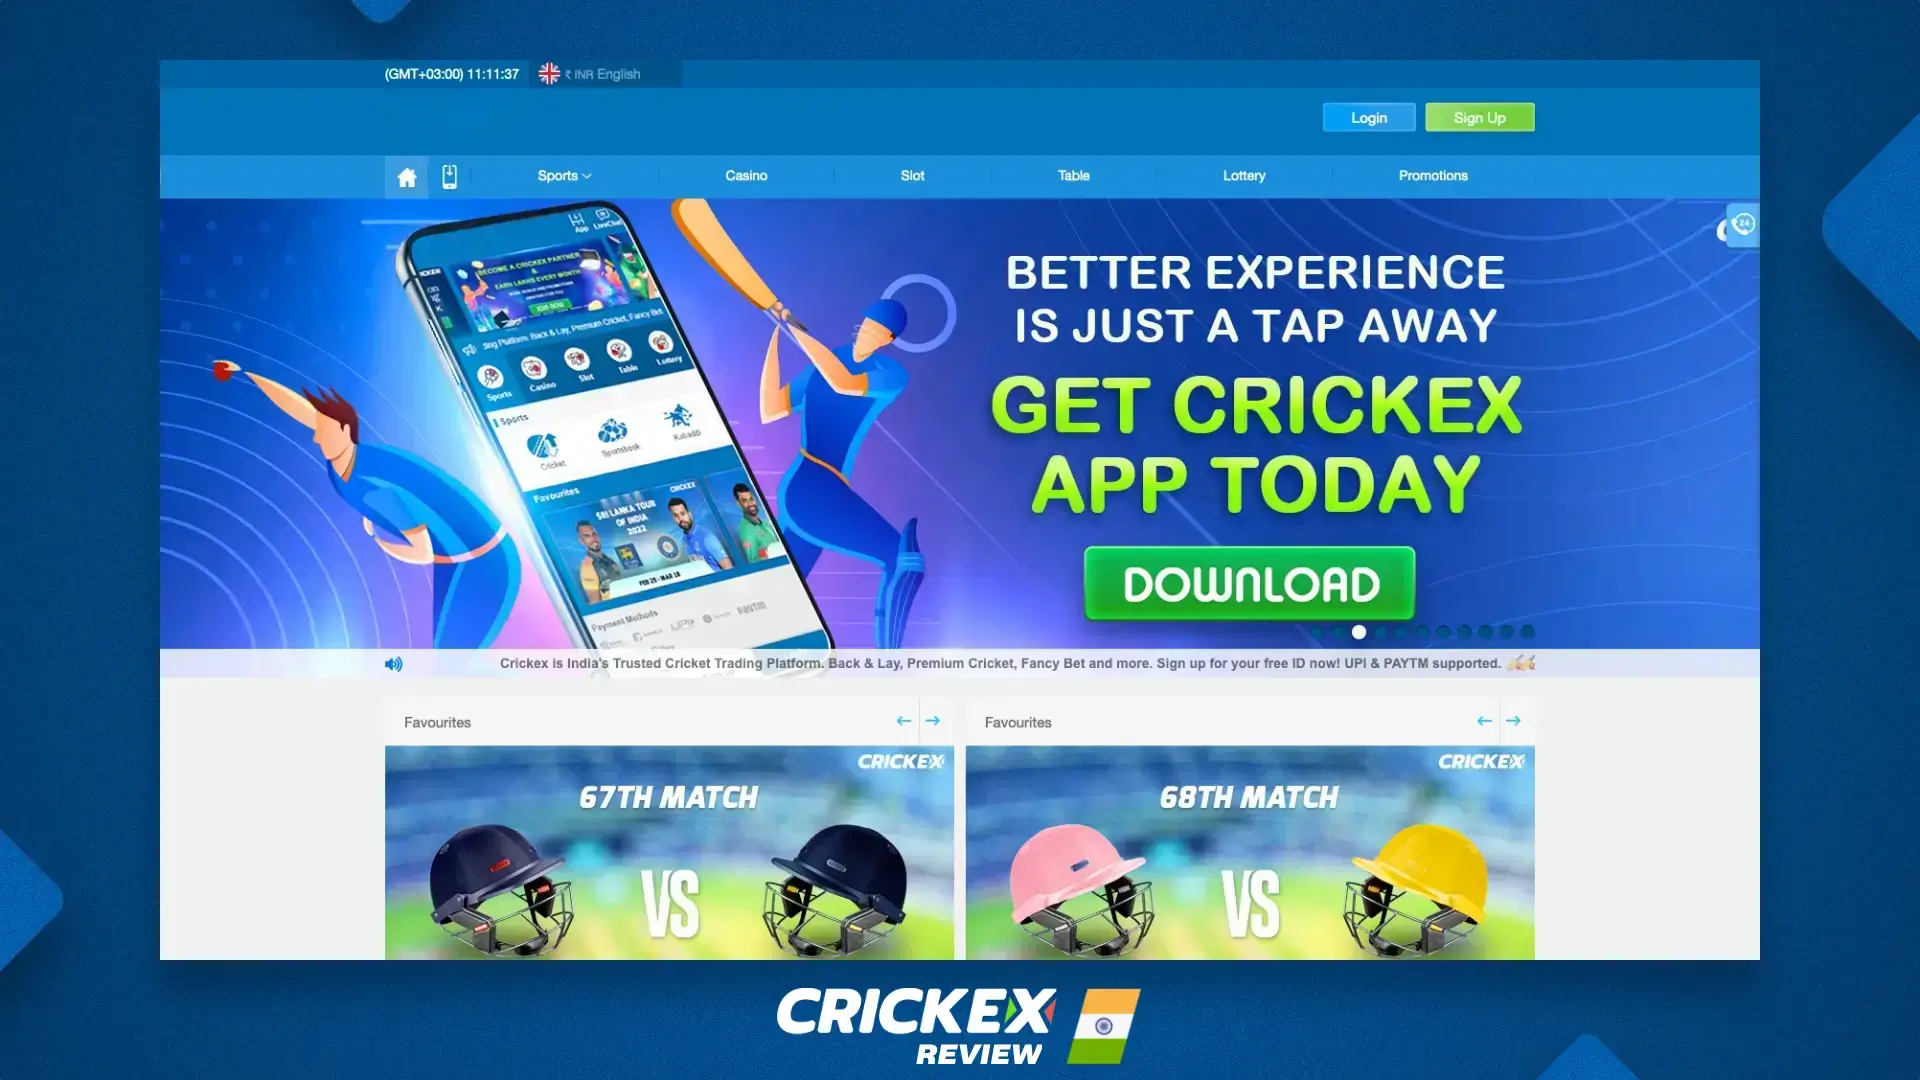 Home page of Crickex website in India